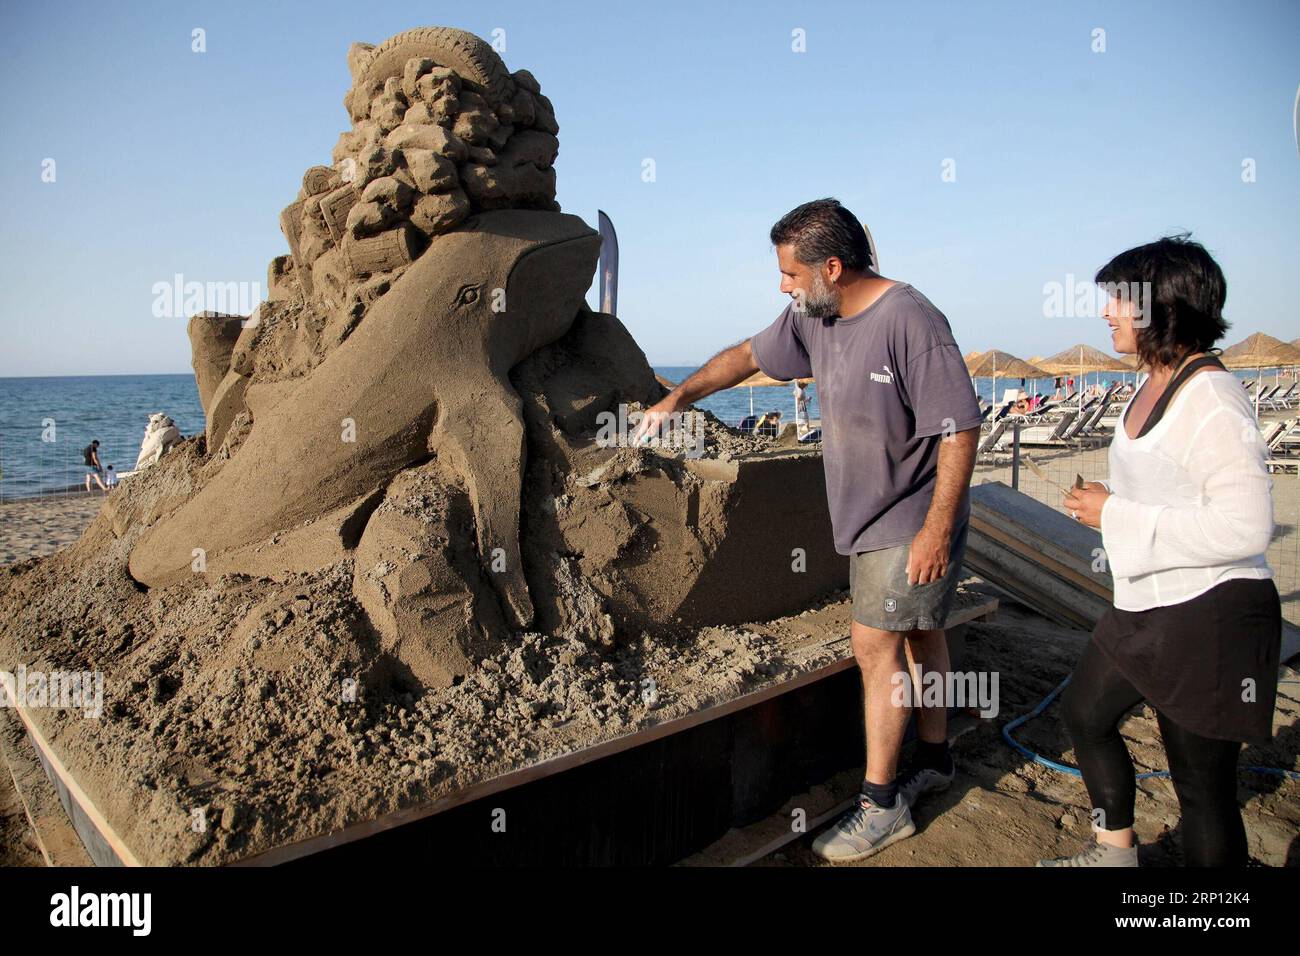 (180605) -- HERAKLION (GREECE), June 5, 2018 -- Greek sculptors Andreas Arapakis (L) and Amalia Florou work at Ammoudara beach, Heraklion, Greece, June 5, 2018. Ammoudara Professional Sand Sculpting Festival is held here to raise public awareness on plastic pollution. ) GREECE-HERAKLION-SAND SCULPTING FESTIVAL StefanosxRapanis PUBLICATIONxNOTxINxCHN Stock Photo